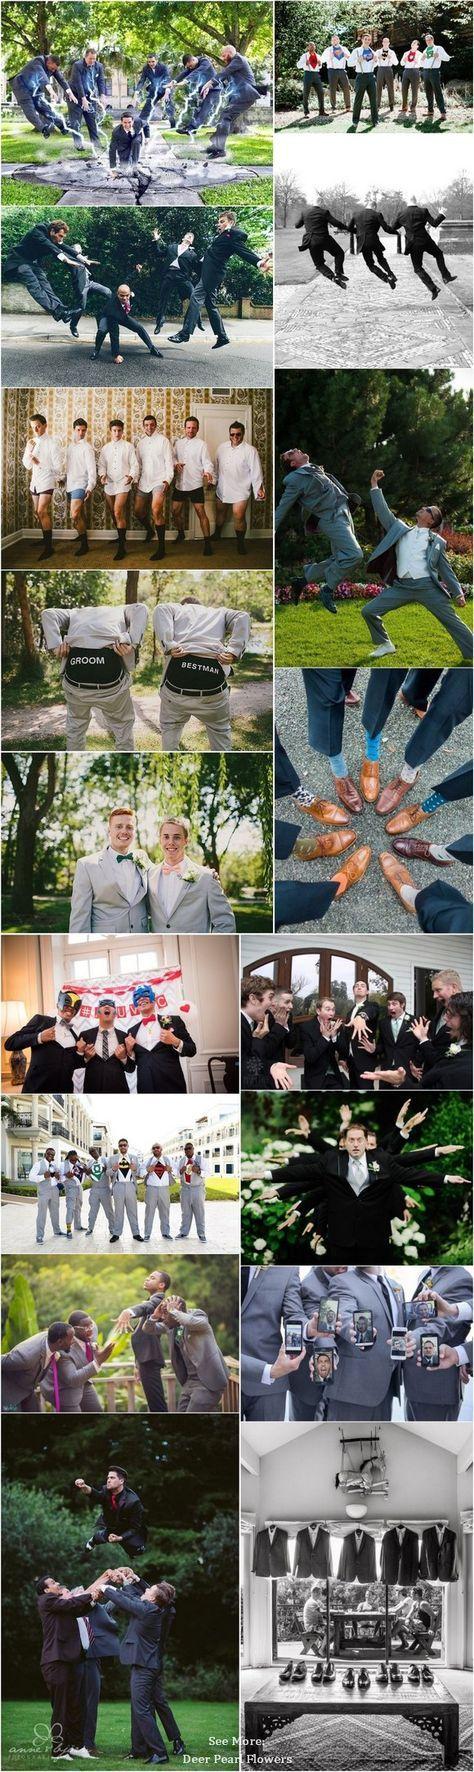 Hochzeit - 30 Fun Groomsmen Photo Ideas And Poses You Have To Try